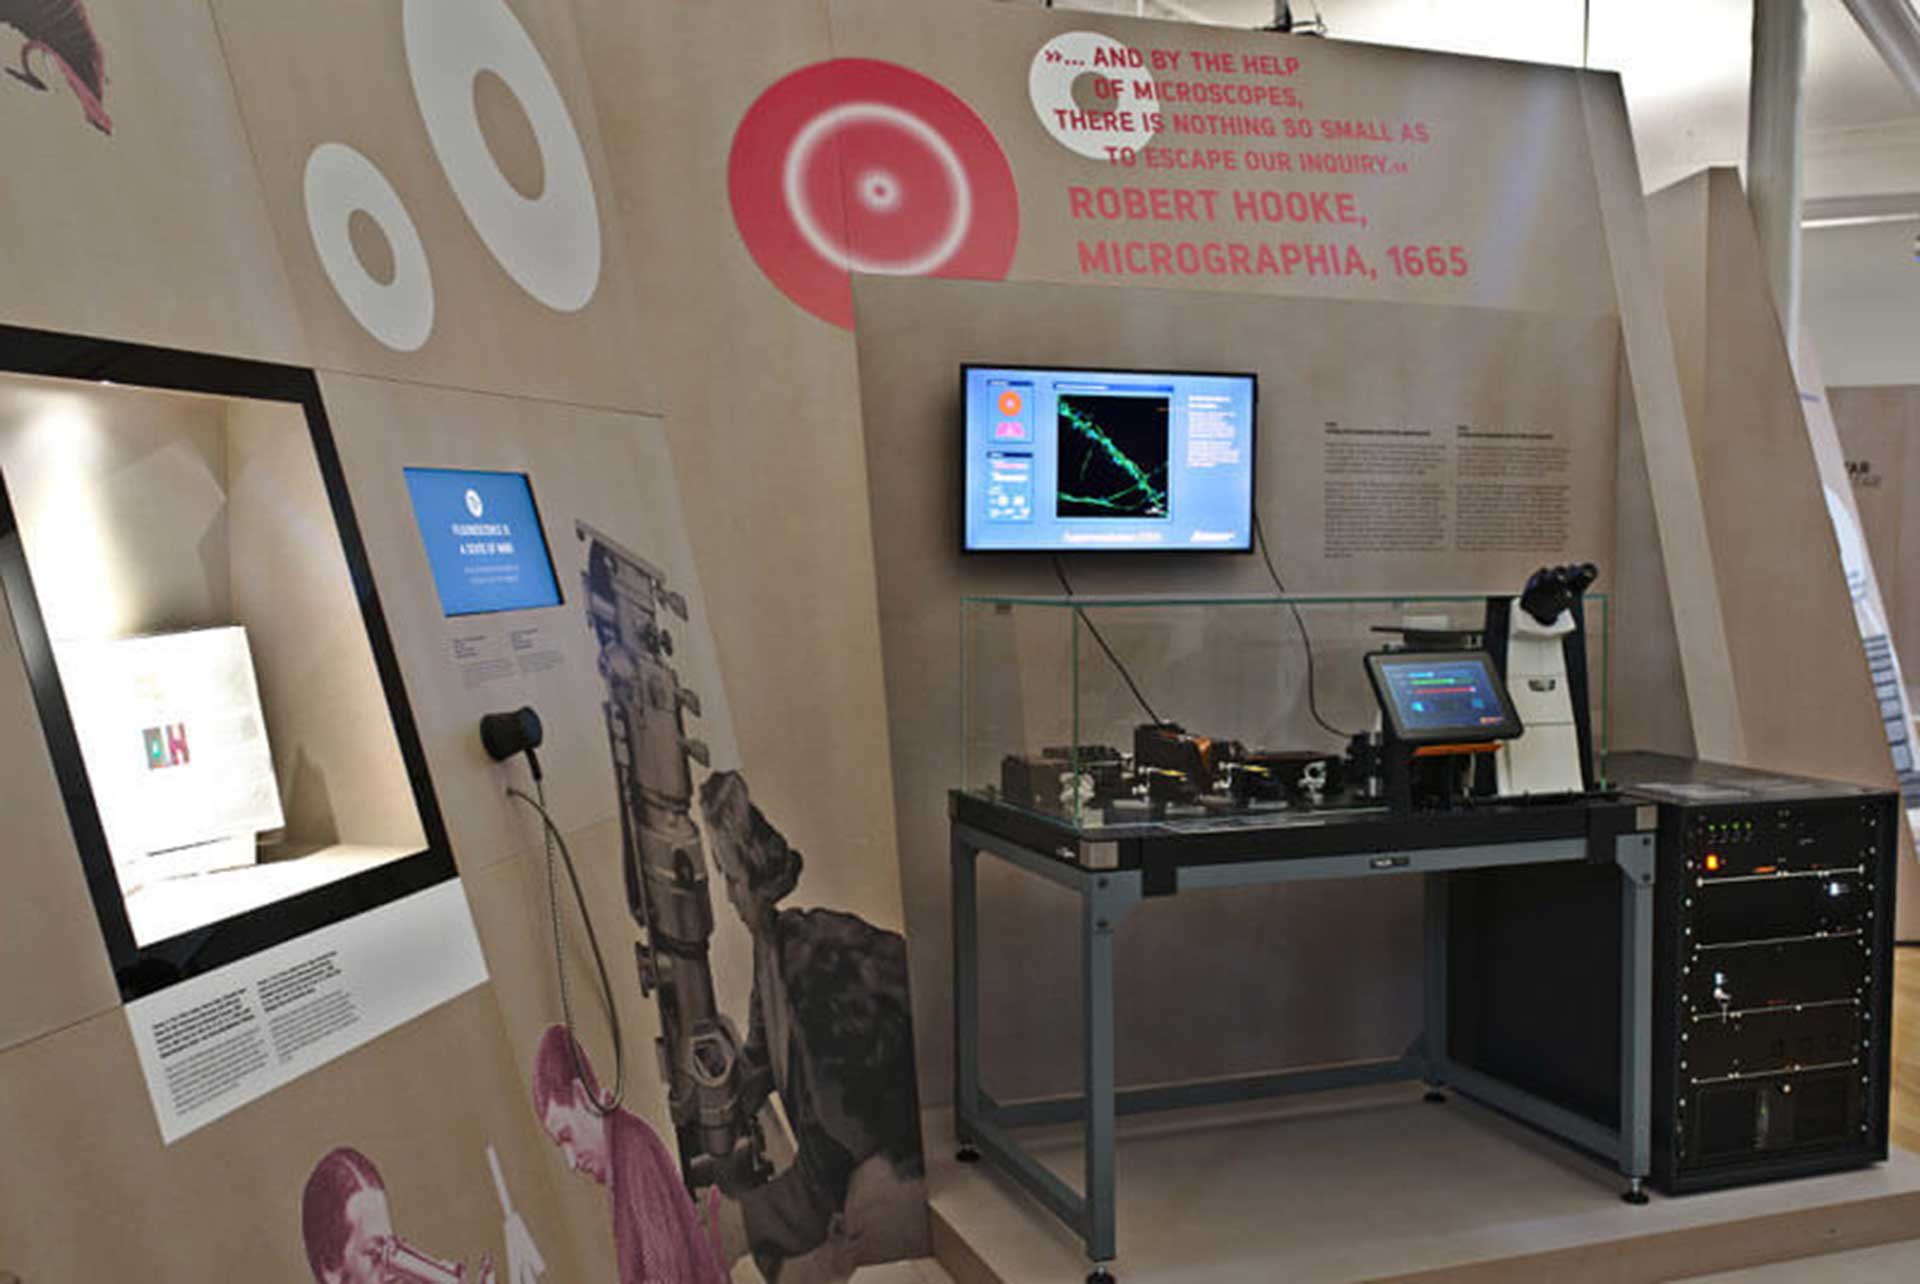 Transparent STED microscope as part of an exhibition